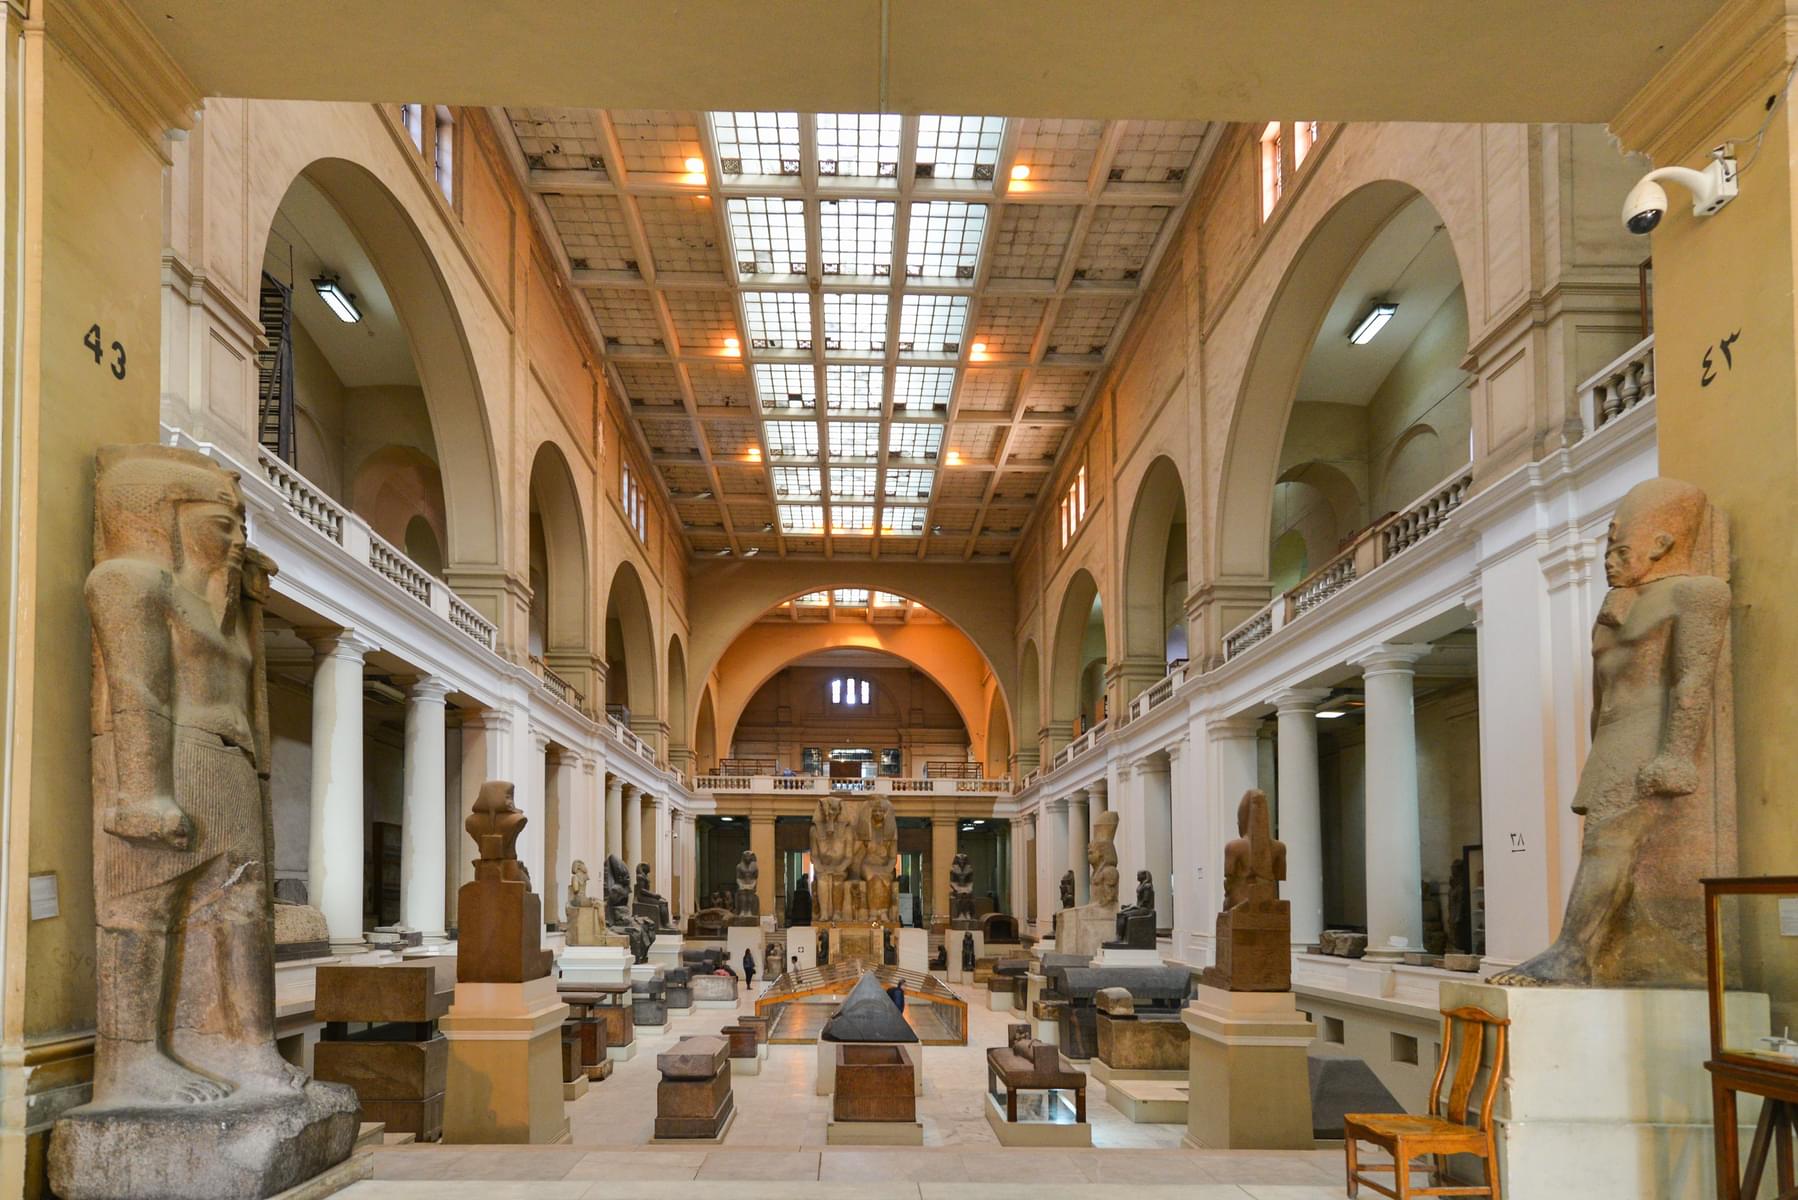 Guided Tour of the Egyptian Museum, Pyramids & the Bazaar